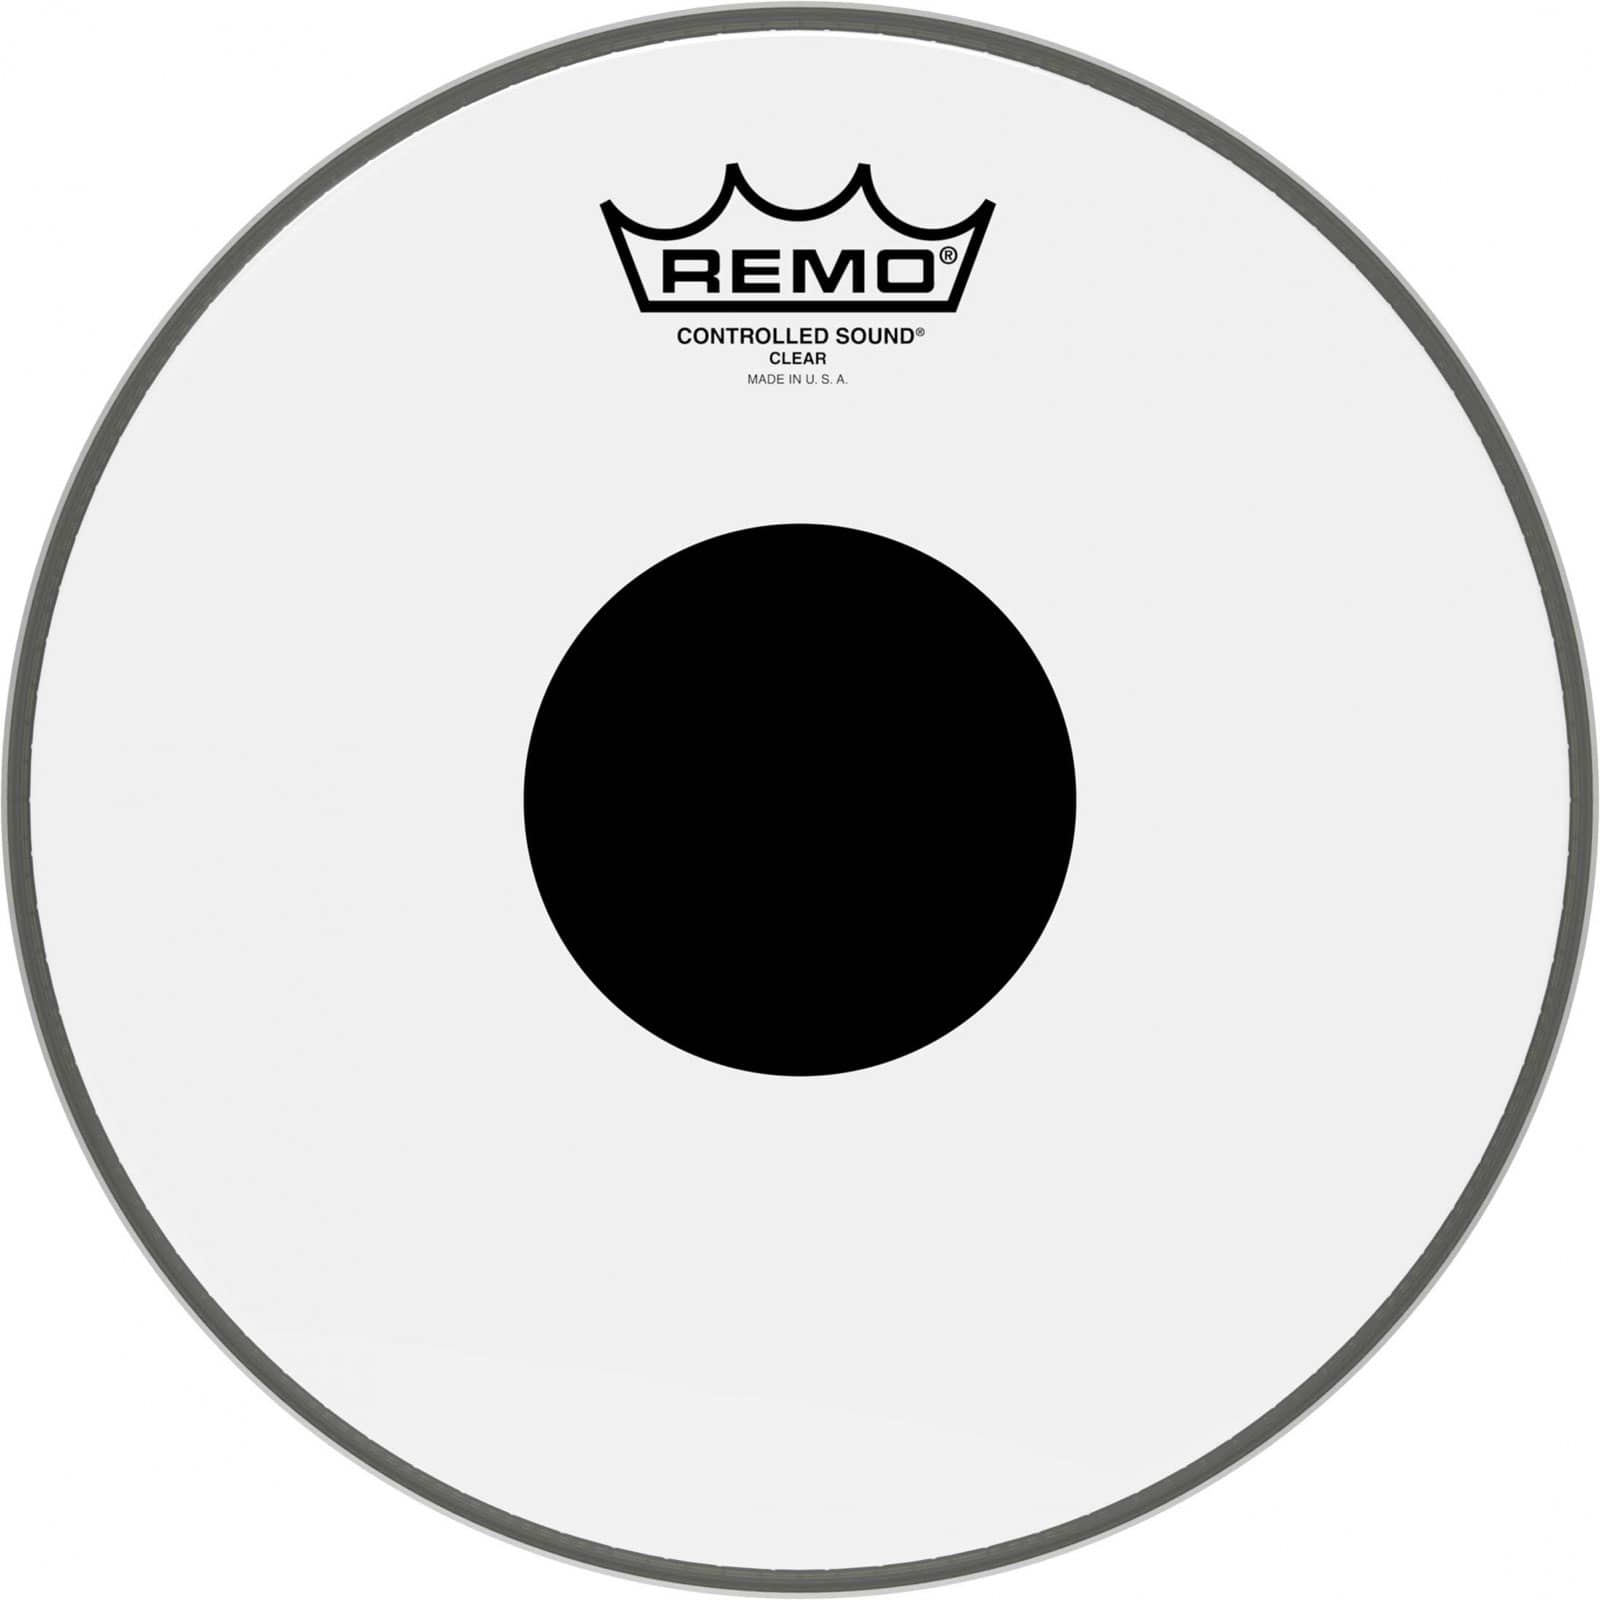 REMO CS-0310-10 - CONTROLLED SOUND CLEAR 10